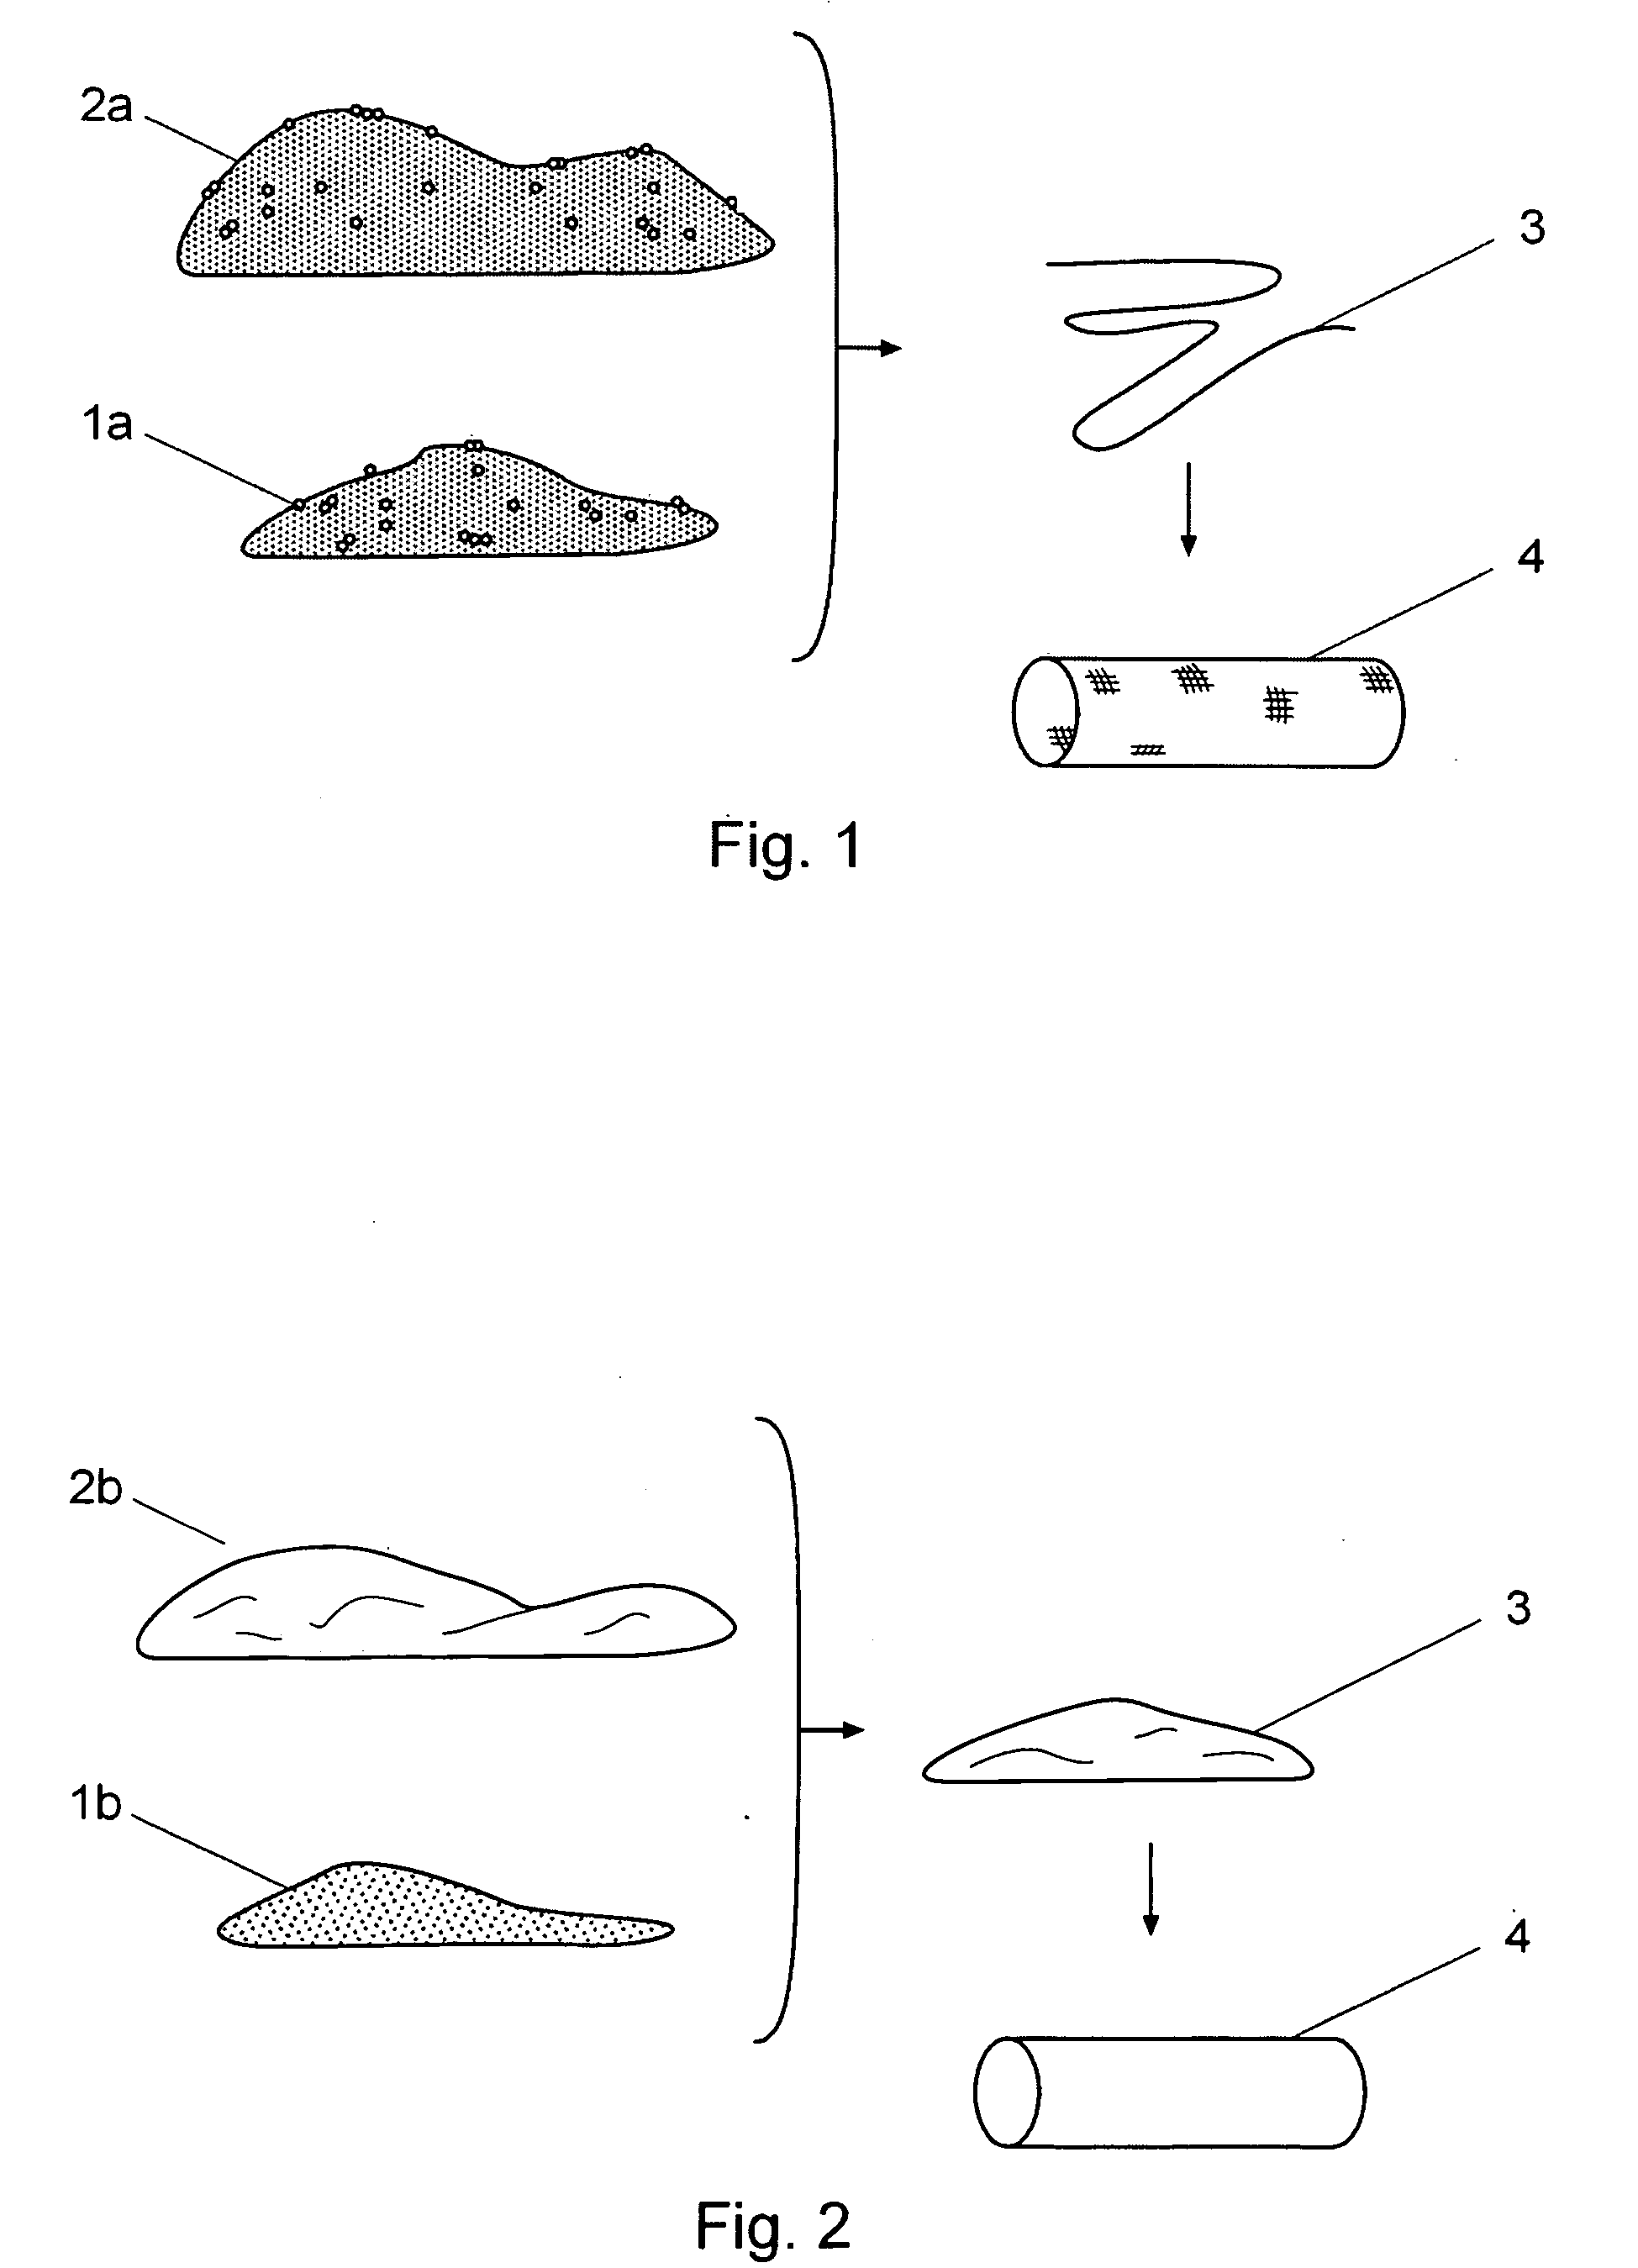 Method of Producing Protective Cable Sheaths, Tubes and Similar